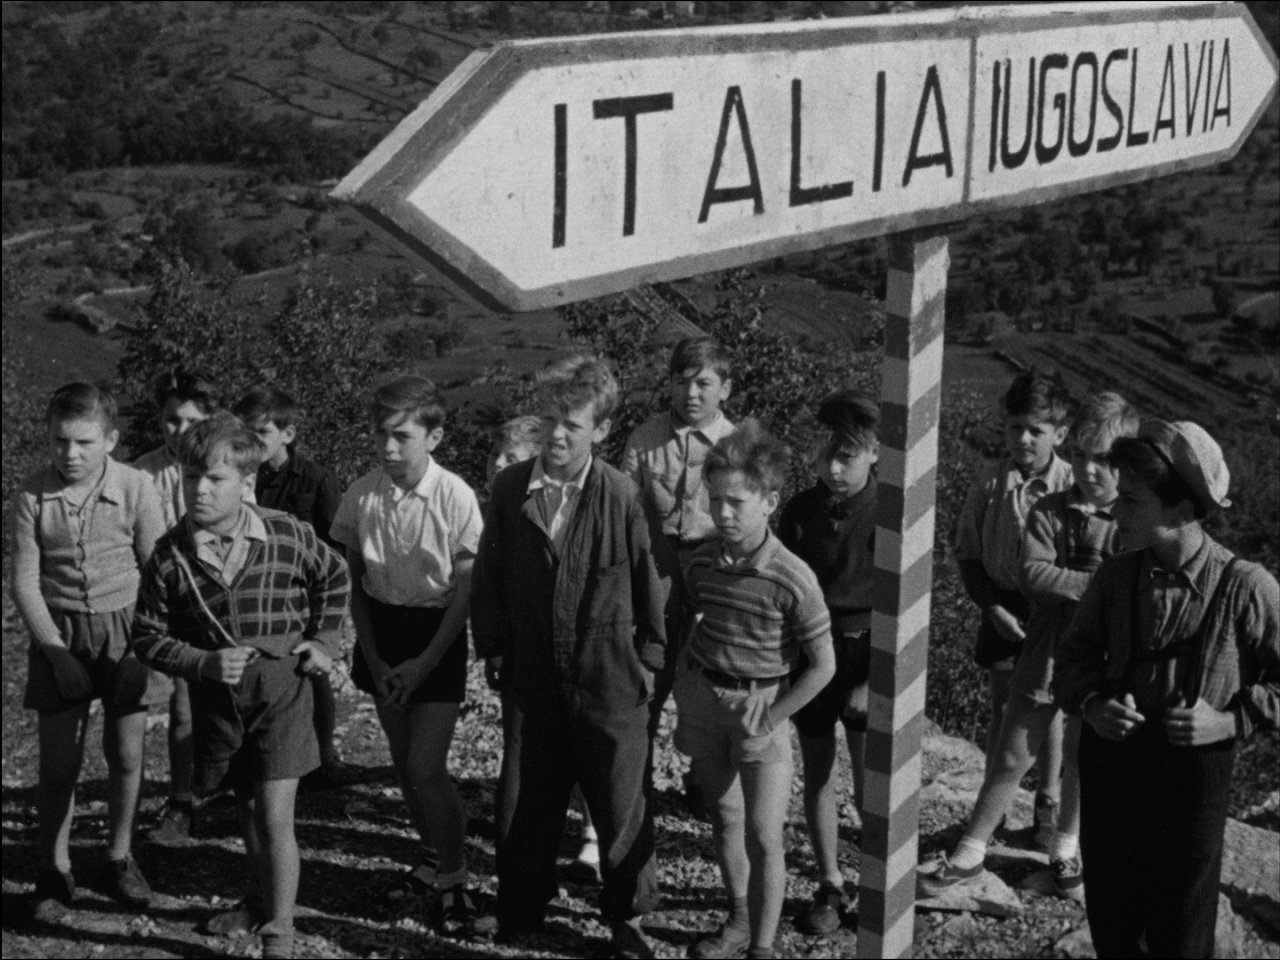 [P]After World War II, in a village on the border between Italy and Yugoslavia, a special demarcation commission draws a line that will divide the village in half. In a few hours, the villagers will have to decide whether they will be Italians or Yugoslavs. This causes many hardships for people. One of the farmers has a house on one side of the border and a field on the other. The young man’s love lives in the other half of the settlement. The children are from all over the village and even they do not accept such changes.[/P]